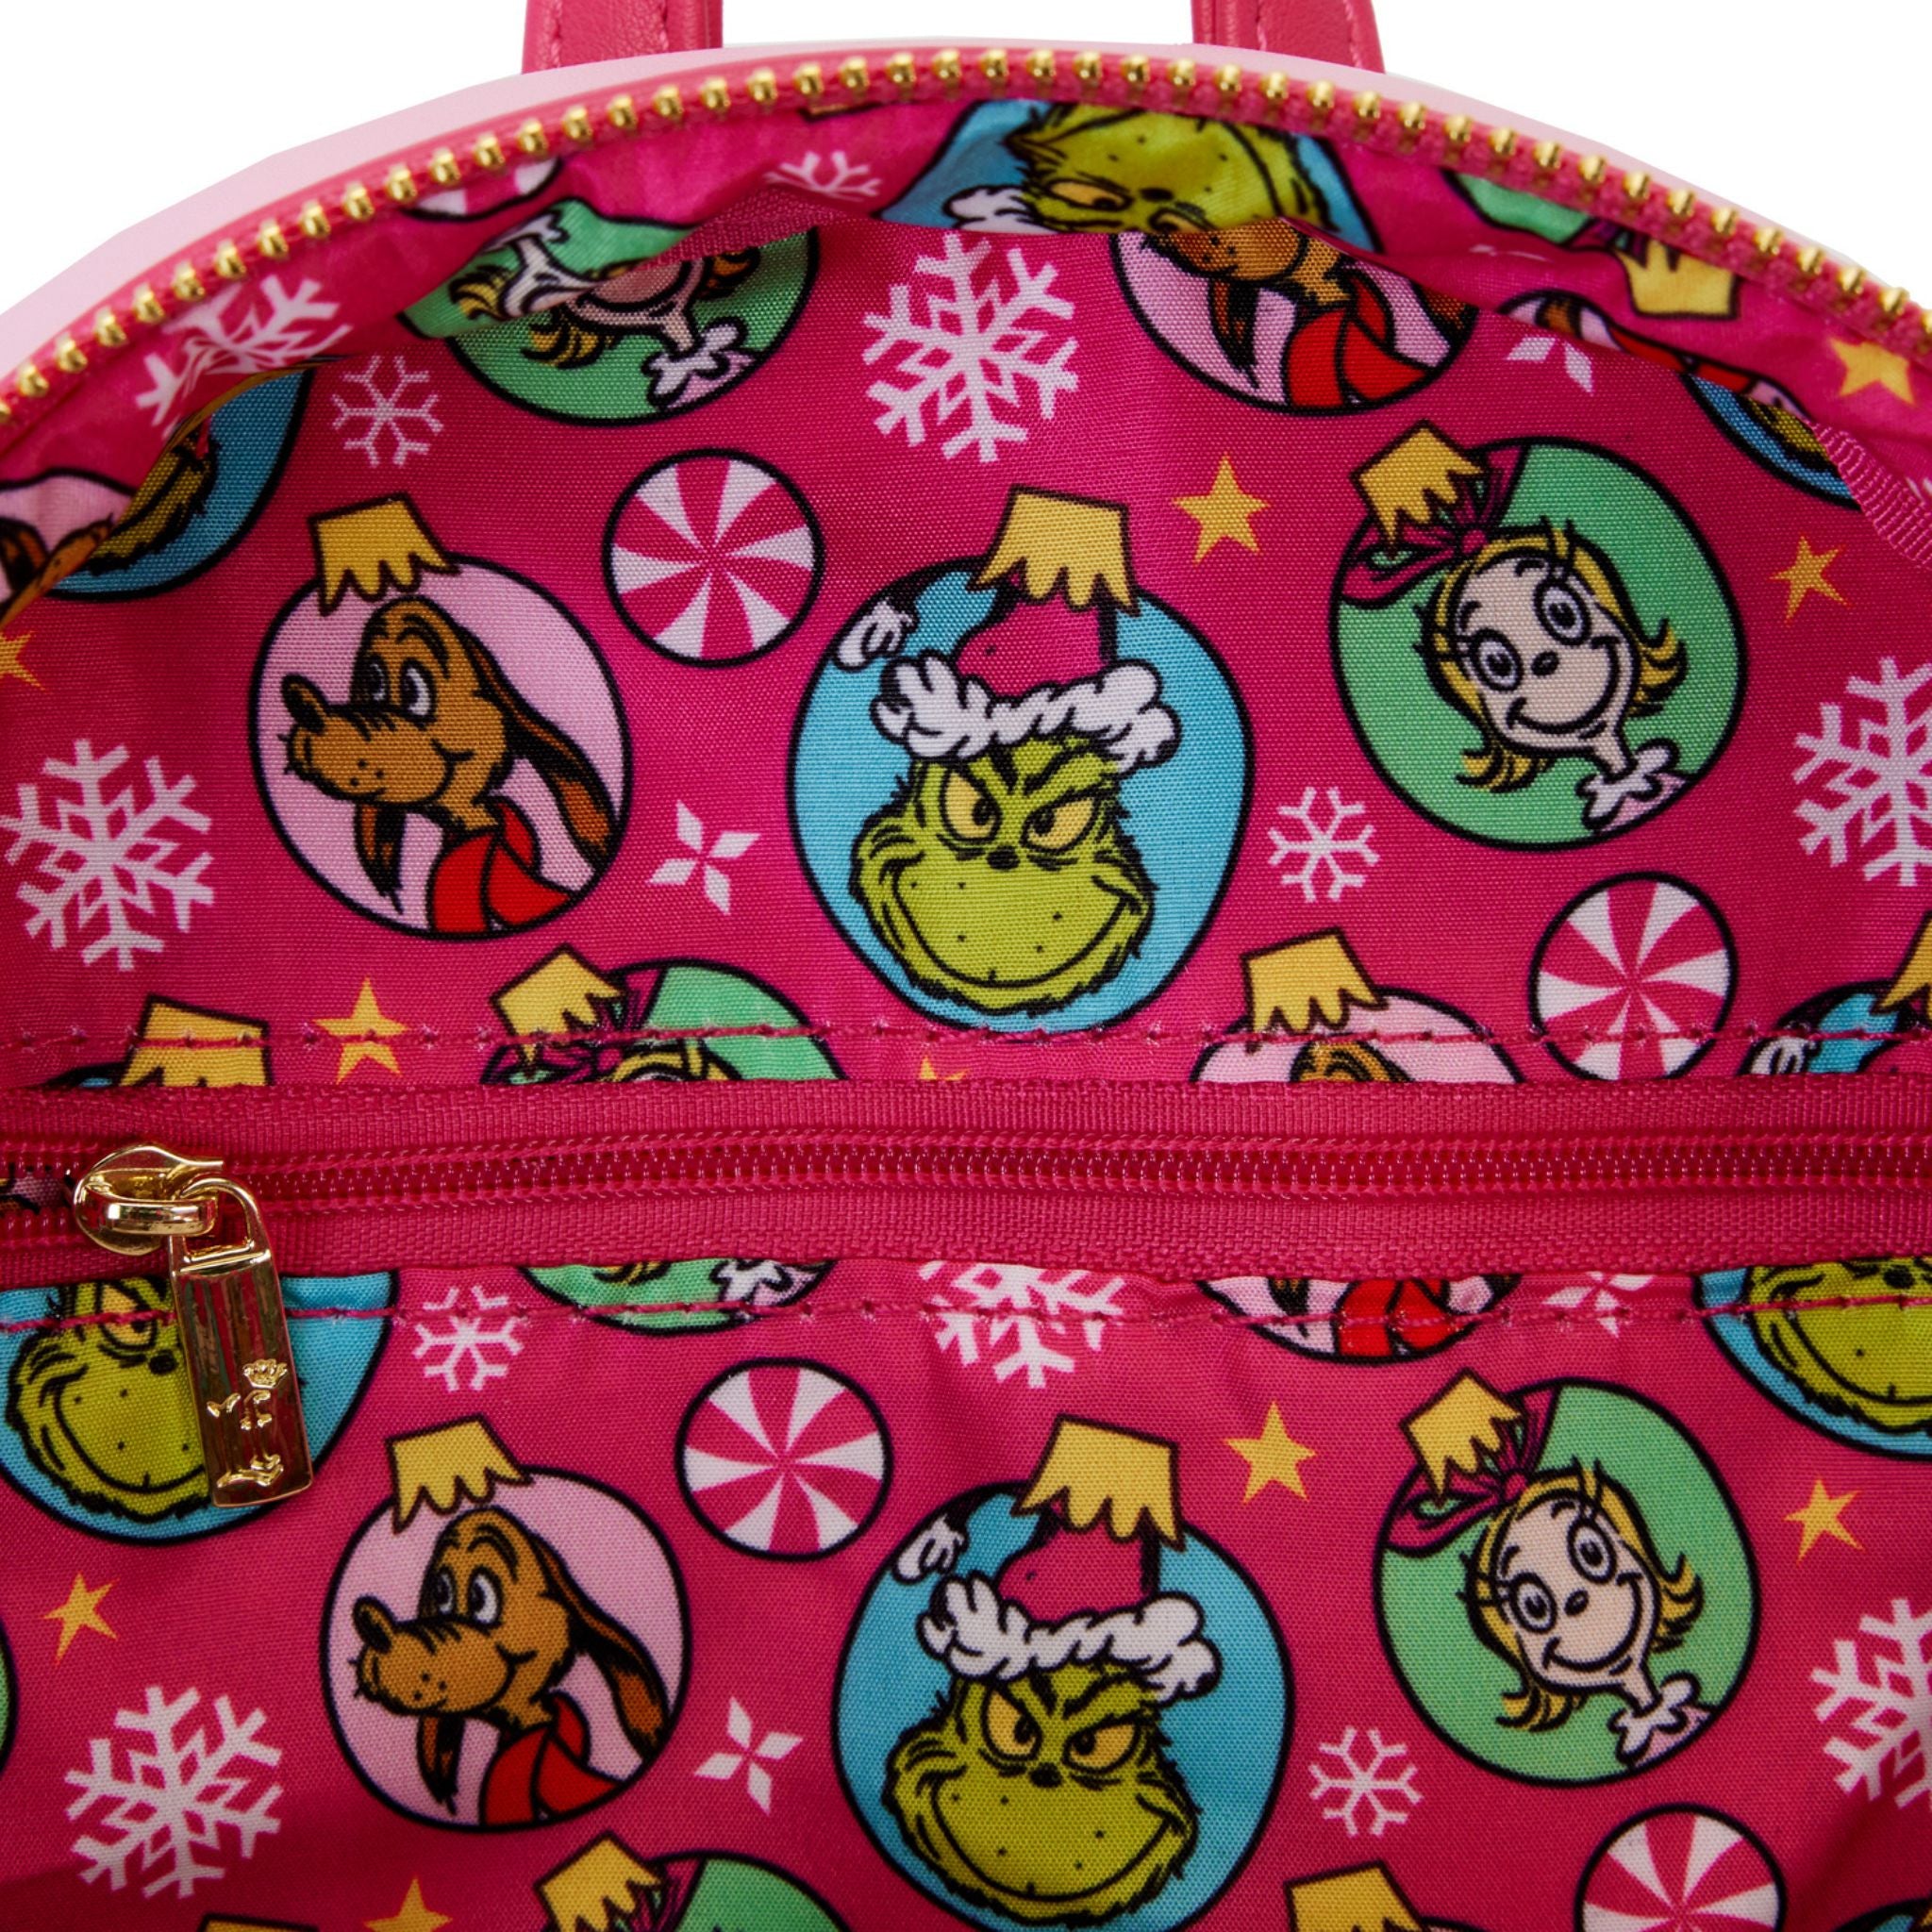 Loungefly Dr Seuss Cindy Lou Who Cosplay Mini Backpack